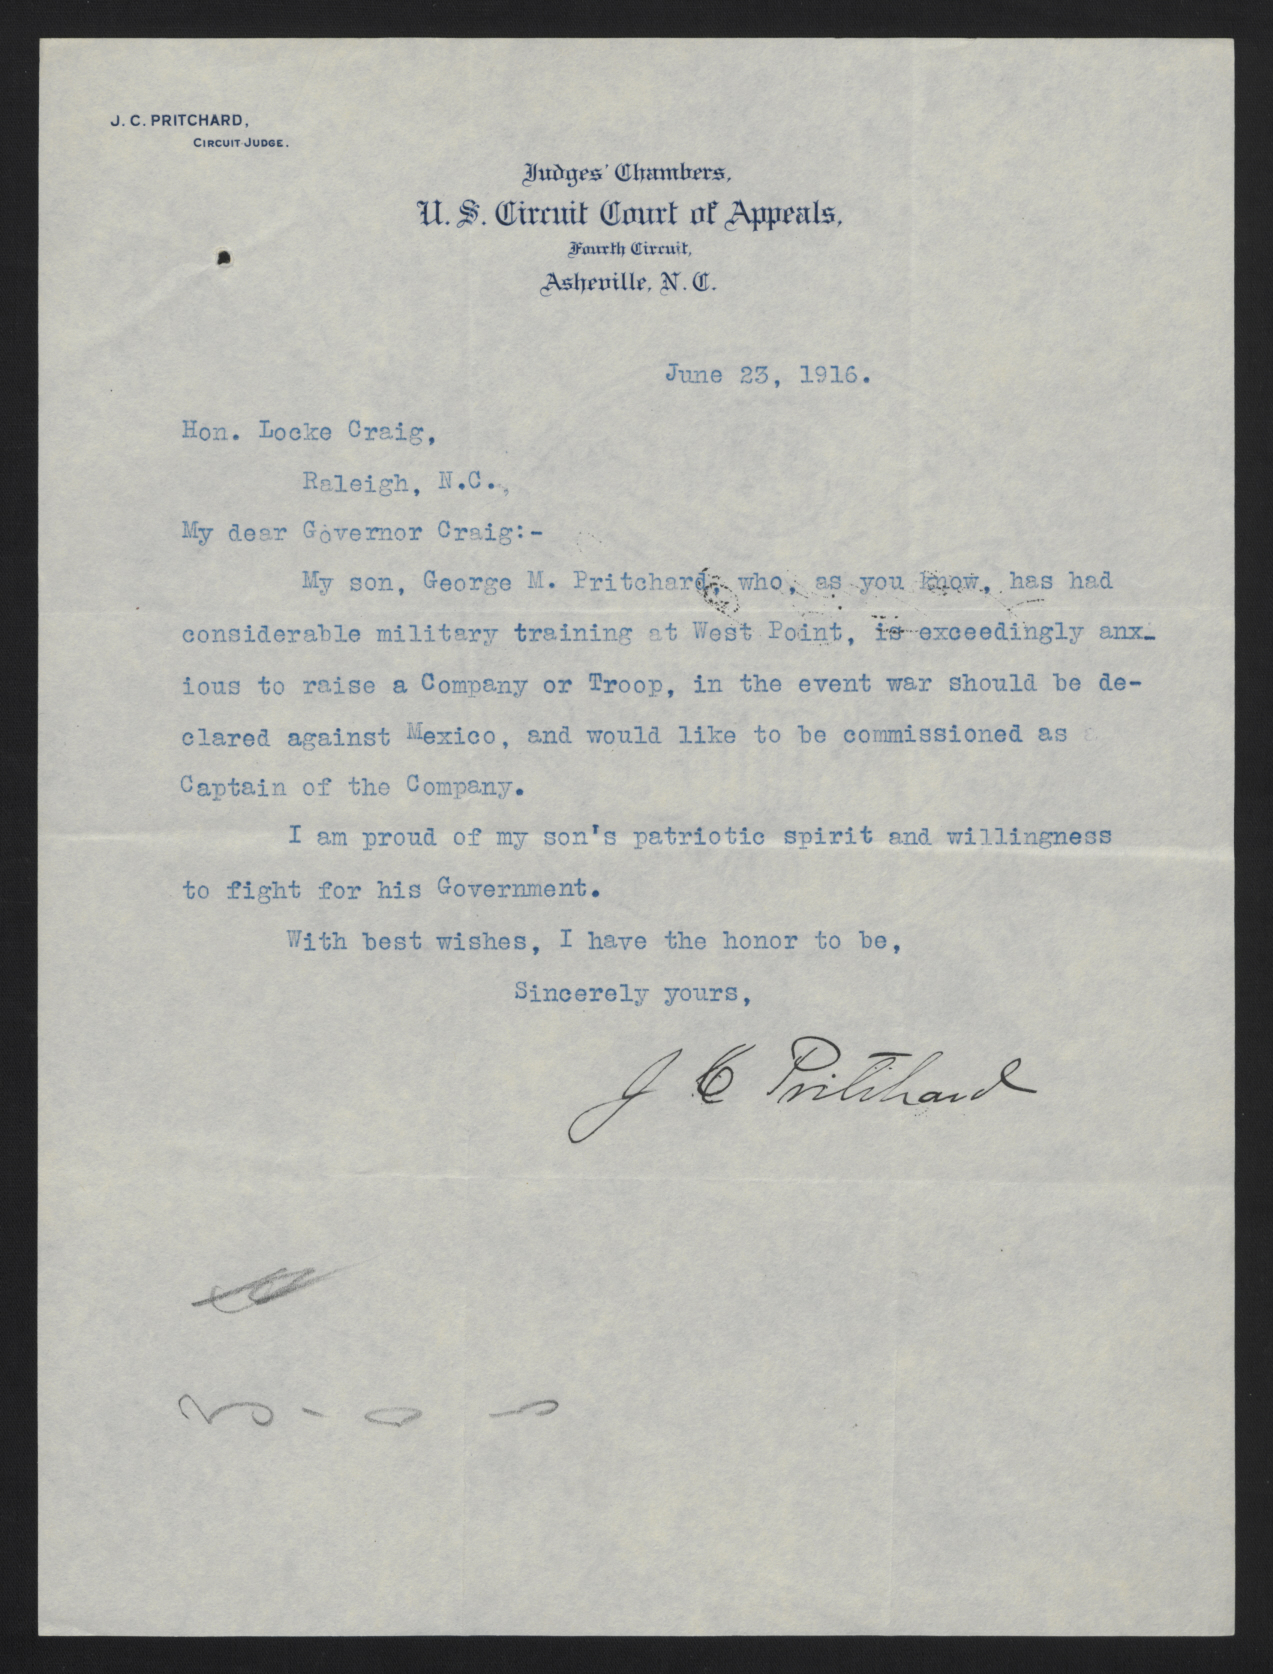 Letter from Pritchard to Craig, June 23, 1916